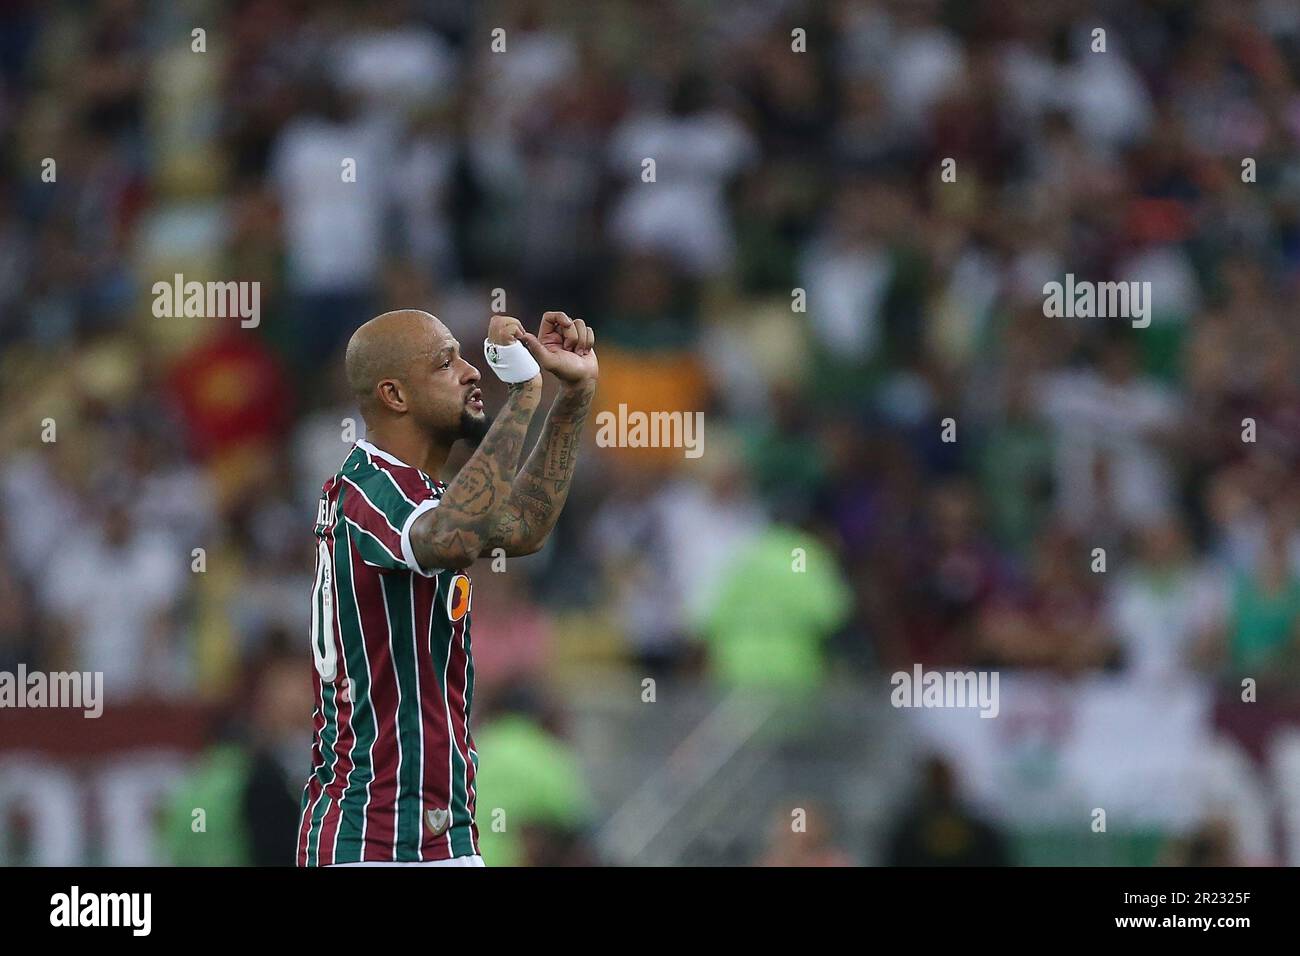 Rio De Janeiro, Brazil. 16th May, 2023. Maracana Stadium Felipe Melo of Fluminense, leaves the pitch after being expelled for fouling Gabriel Barbosa of Flamengo, during the match between Fluminense and Flamengo, for the round of 16 of the Copa do Brasil 2023, at Estadio do Maracana, this Tuesday 16. 30761 (Daniel Castelo Branco/SPP) Credit: SPP Sport Press Photo. /Alamy Live News Stock Photo